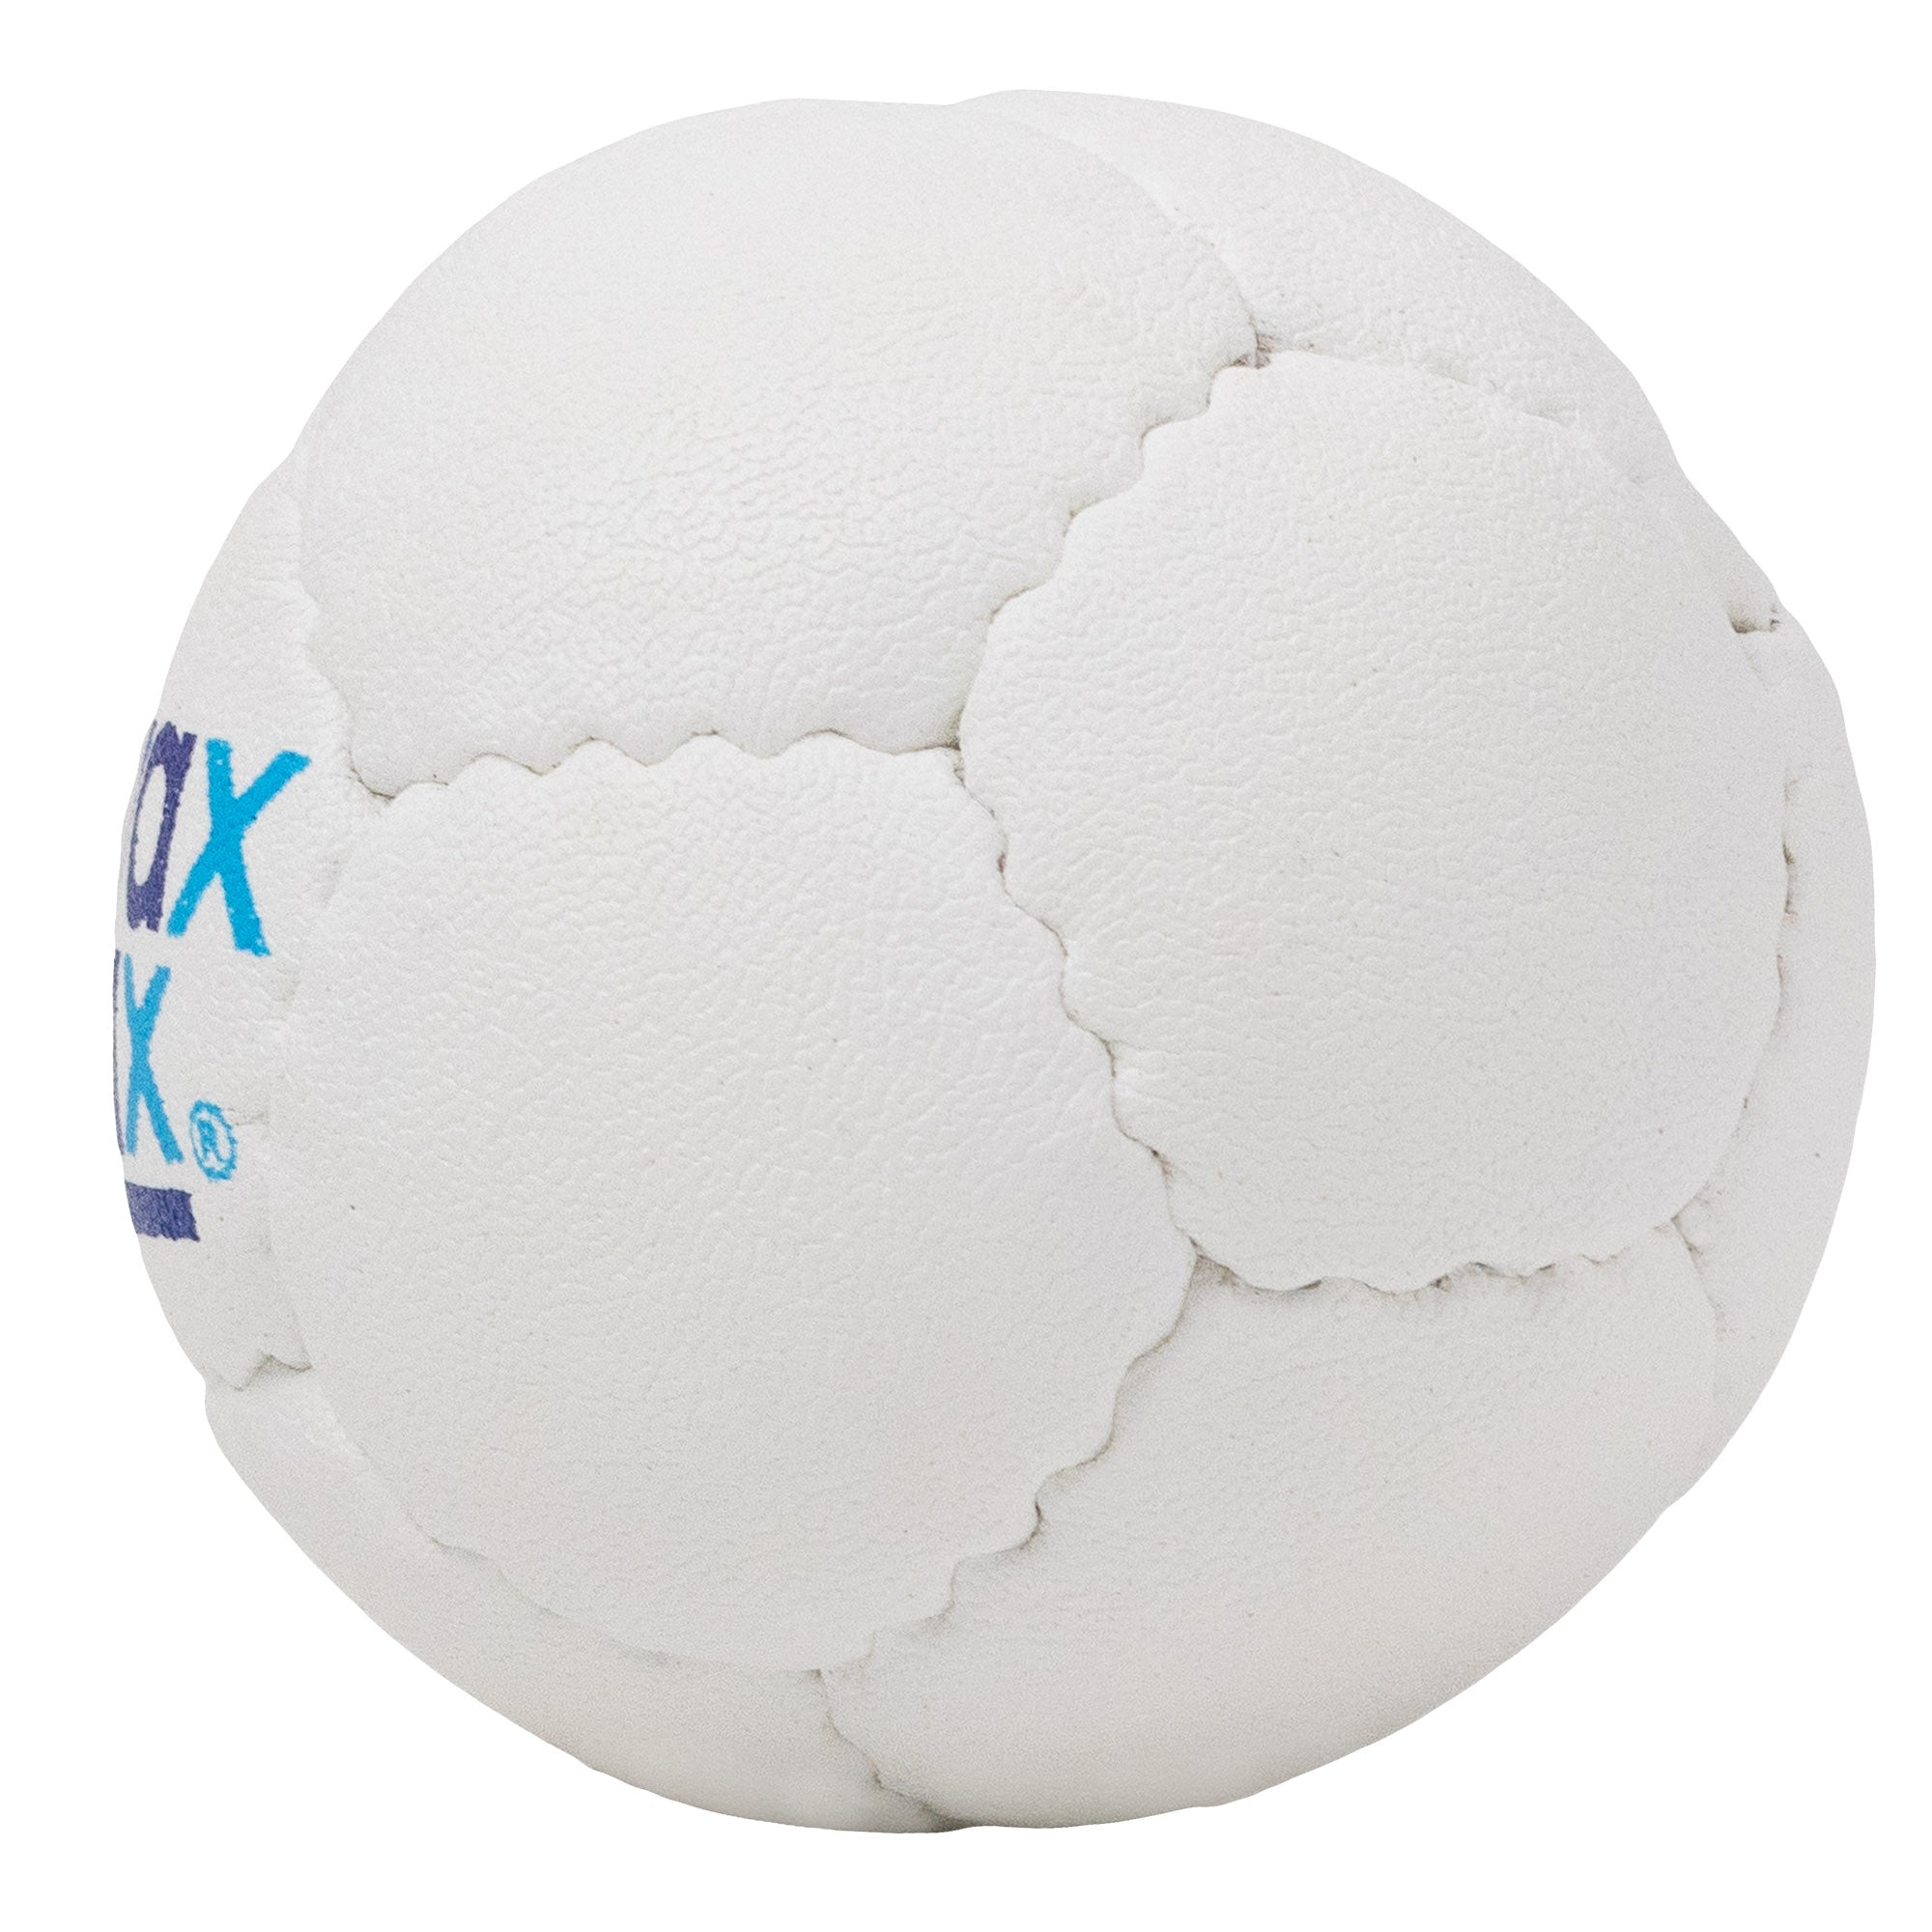 White Swax Lax lacrosse training ball - side view